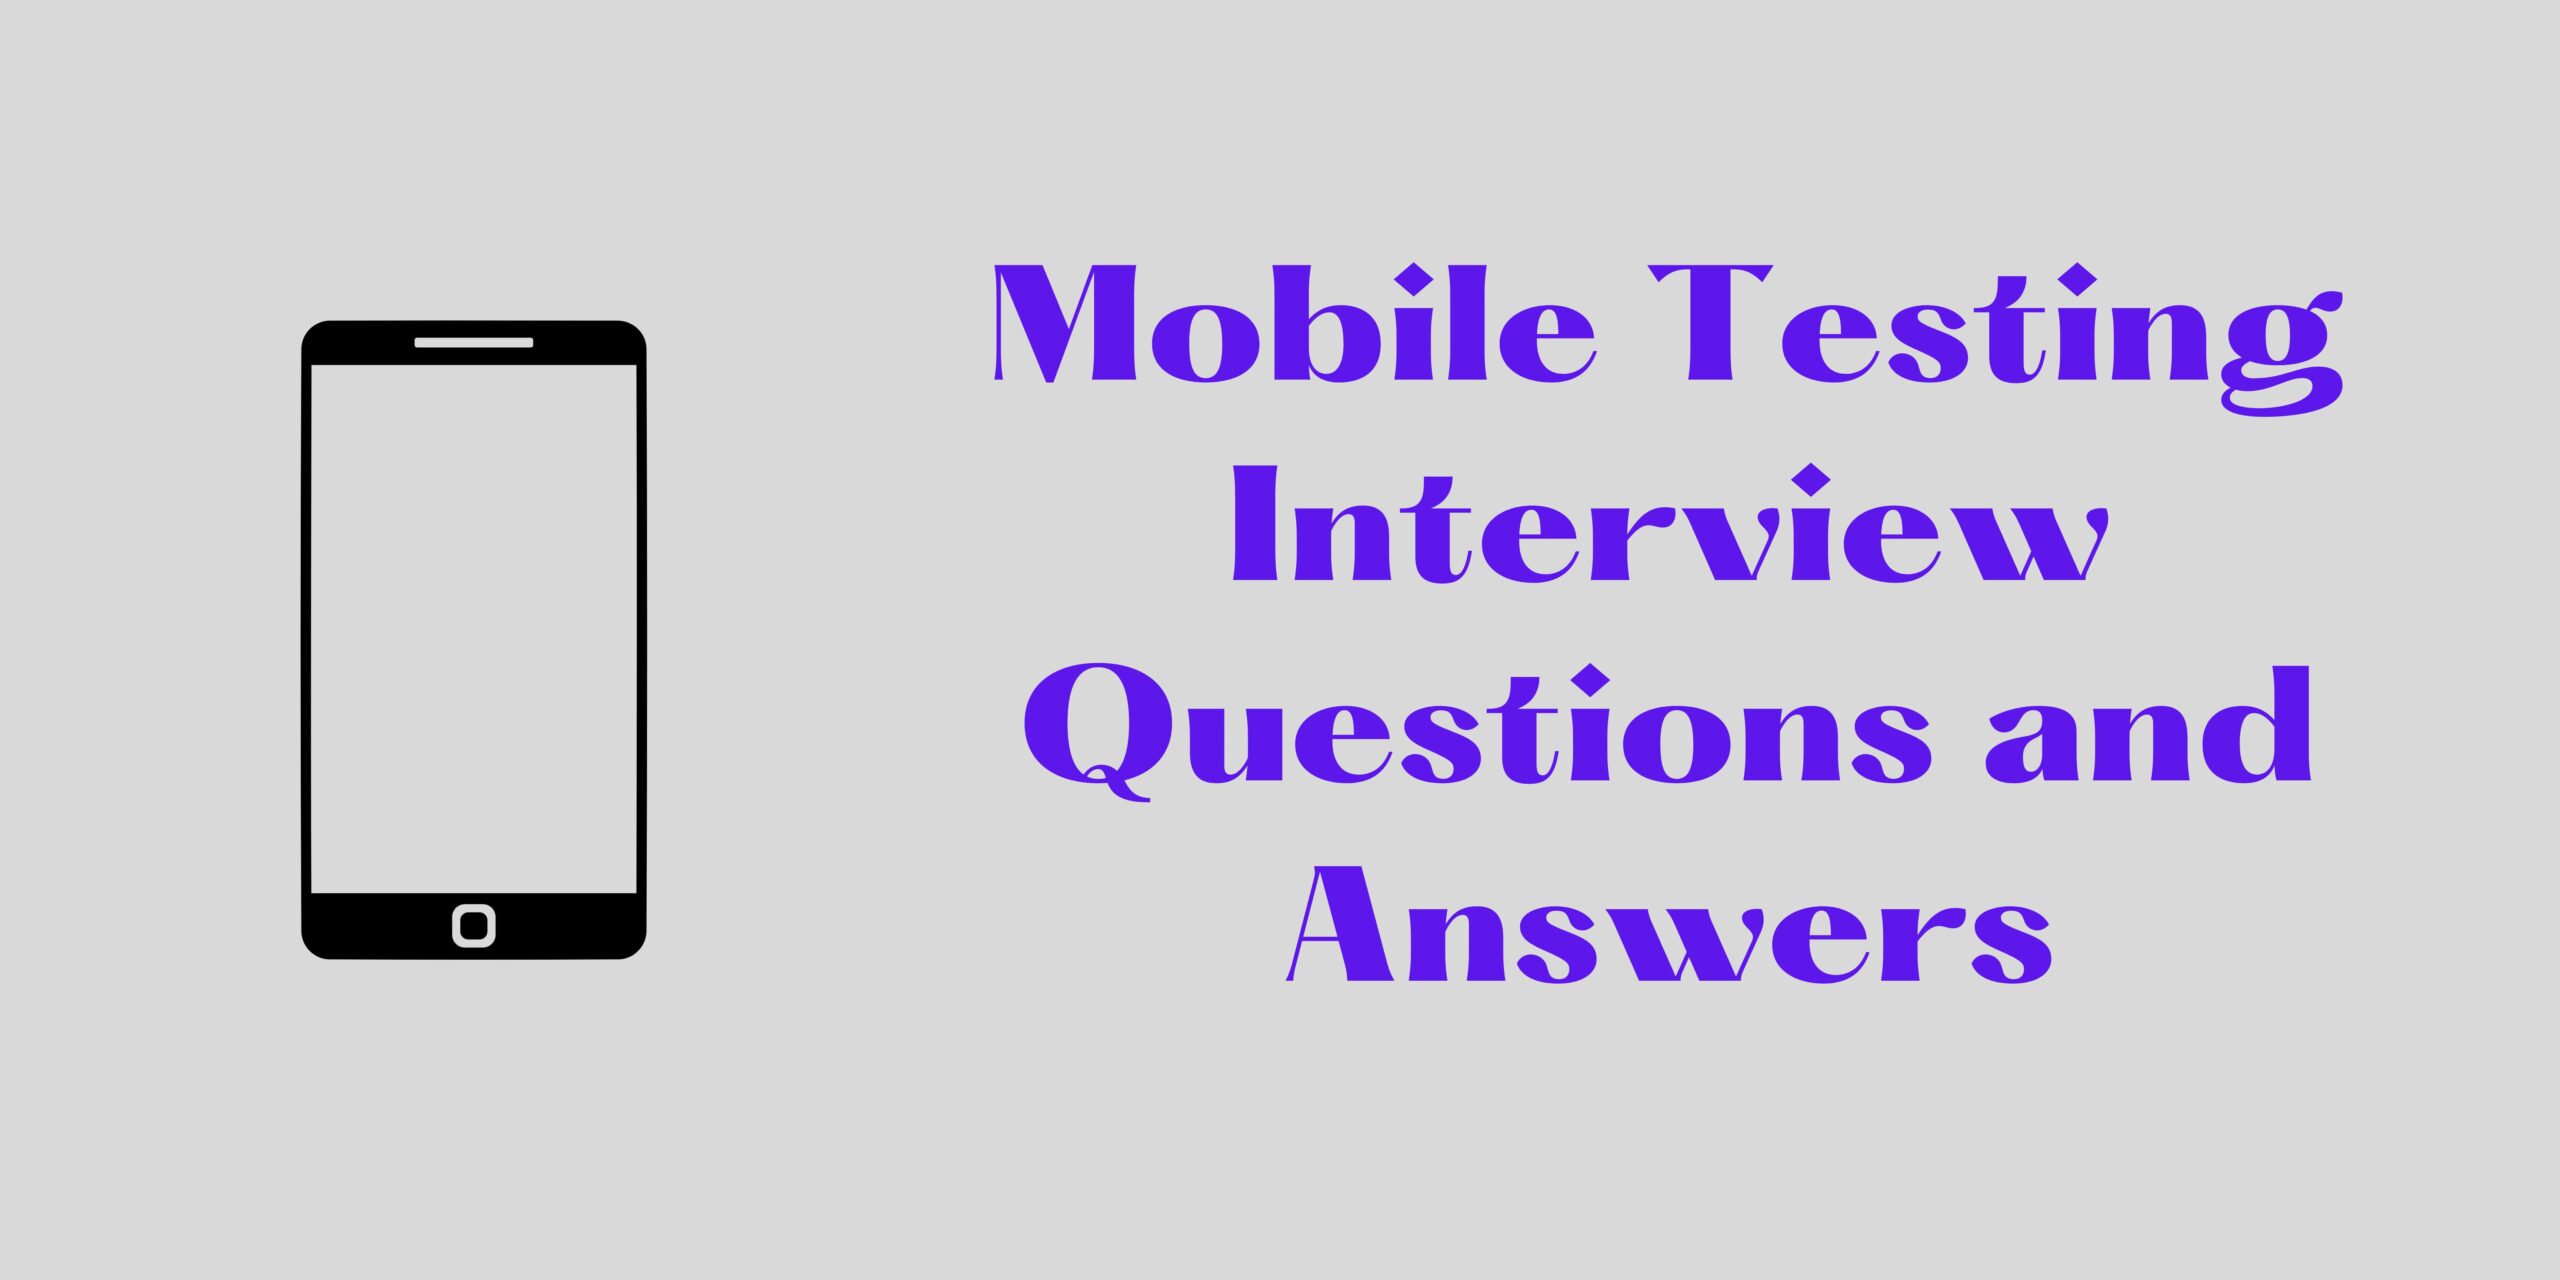 Mobile Testing Interview Questions and Answers